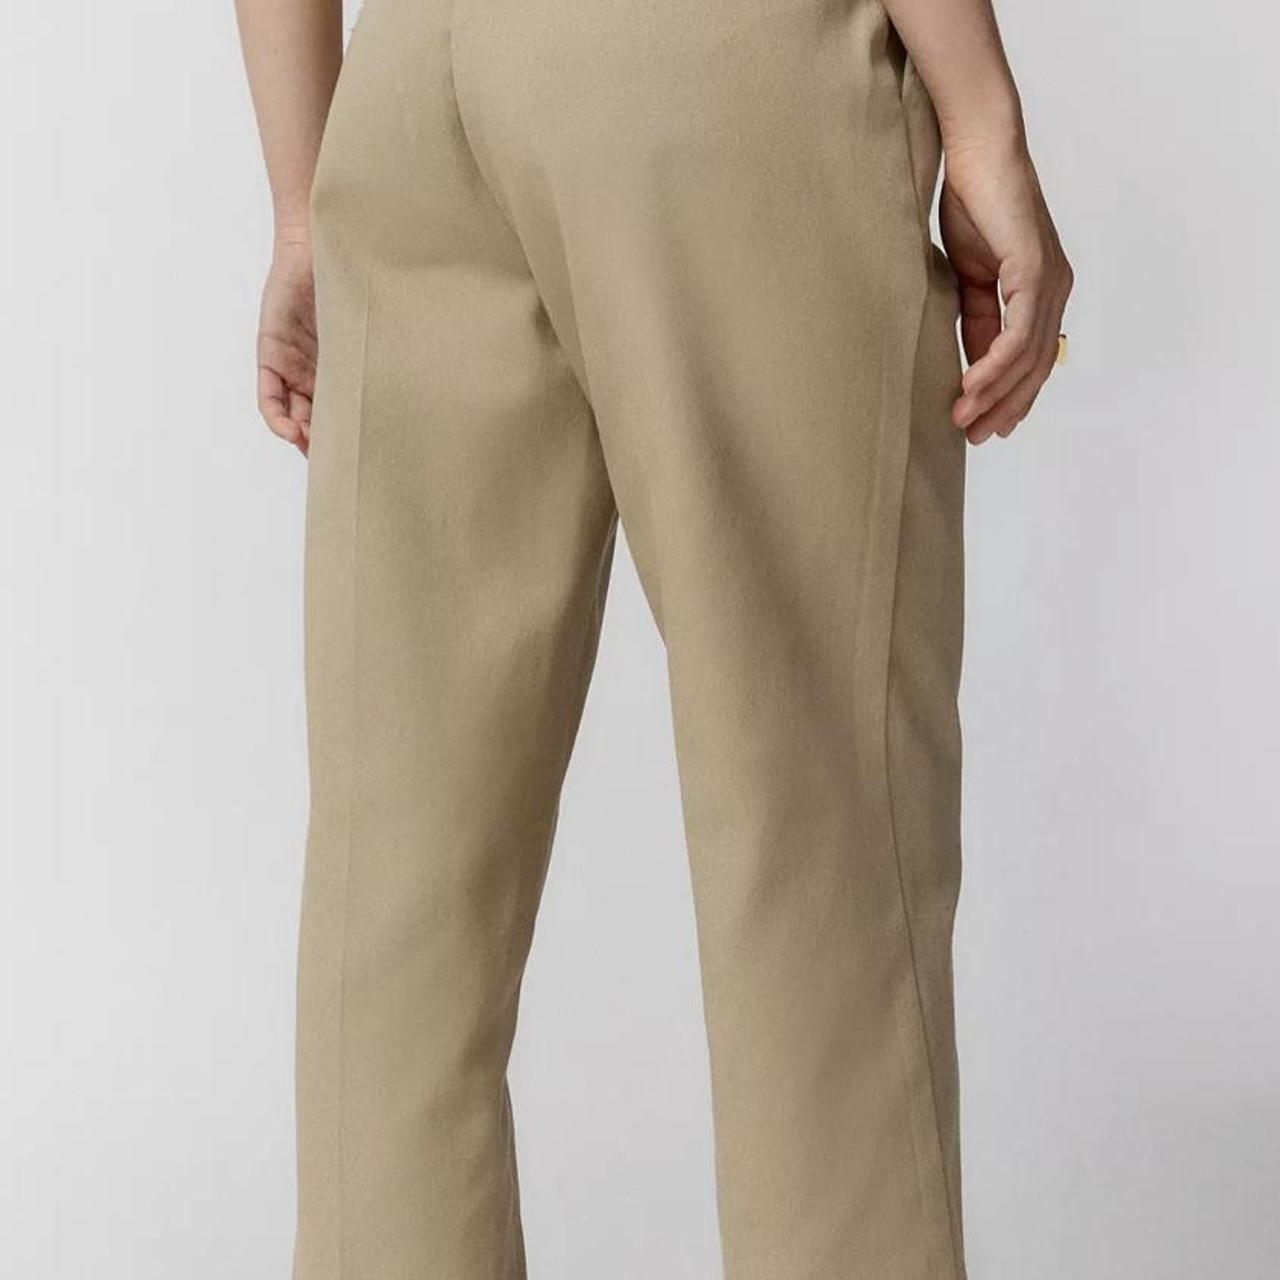 Dickies UO Exclusive High-Waisted Ankle Pant